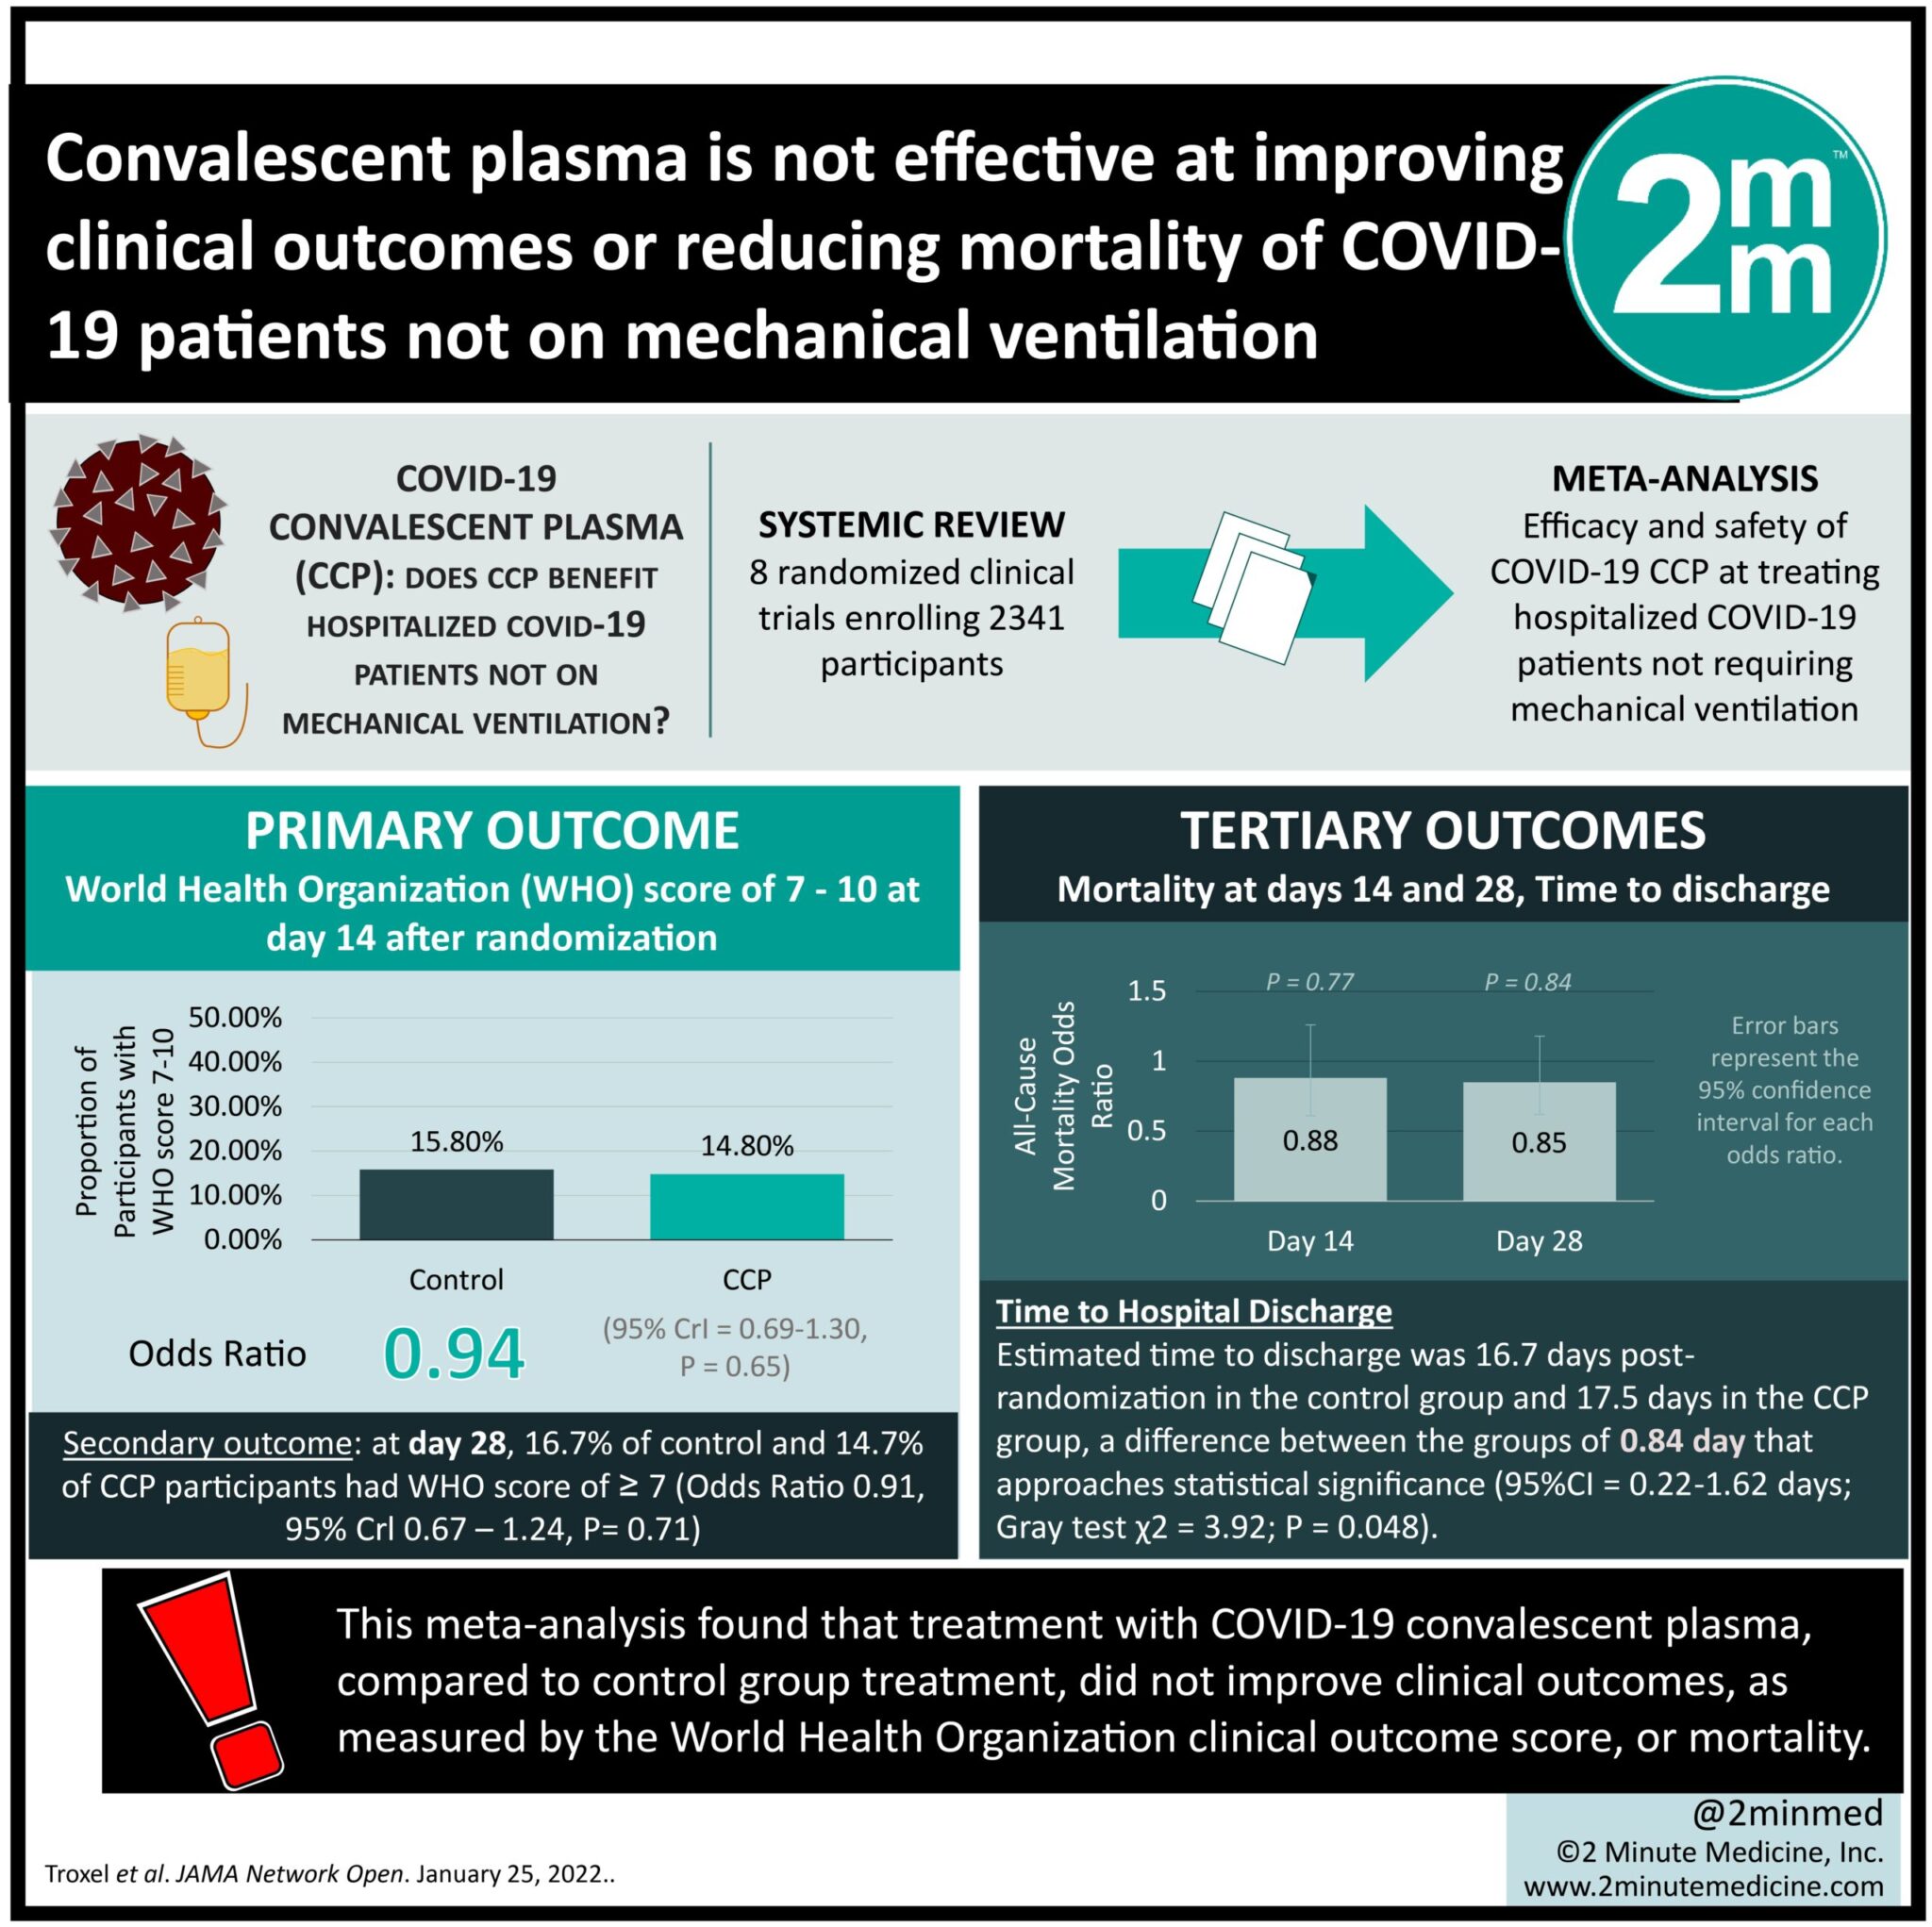 #VisualAbstract: Convalescent Plasma Ineffective at Improving Clinical Outcomes or Mortality in Non-Ventilated Patients With COVID-19